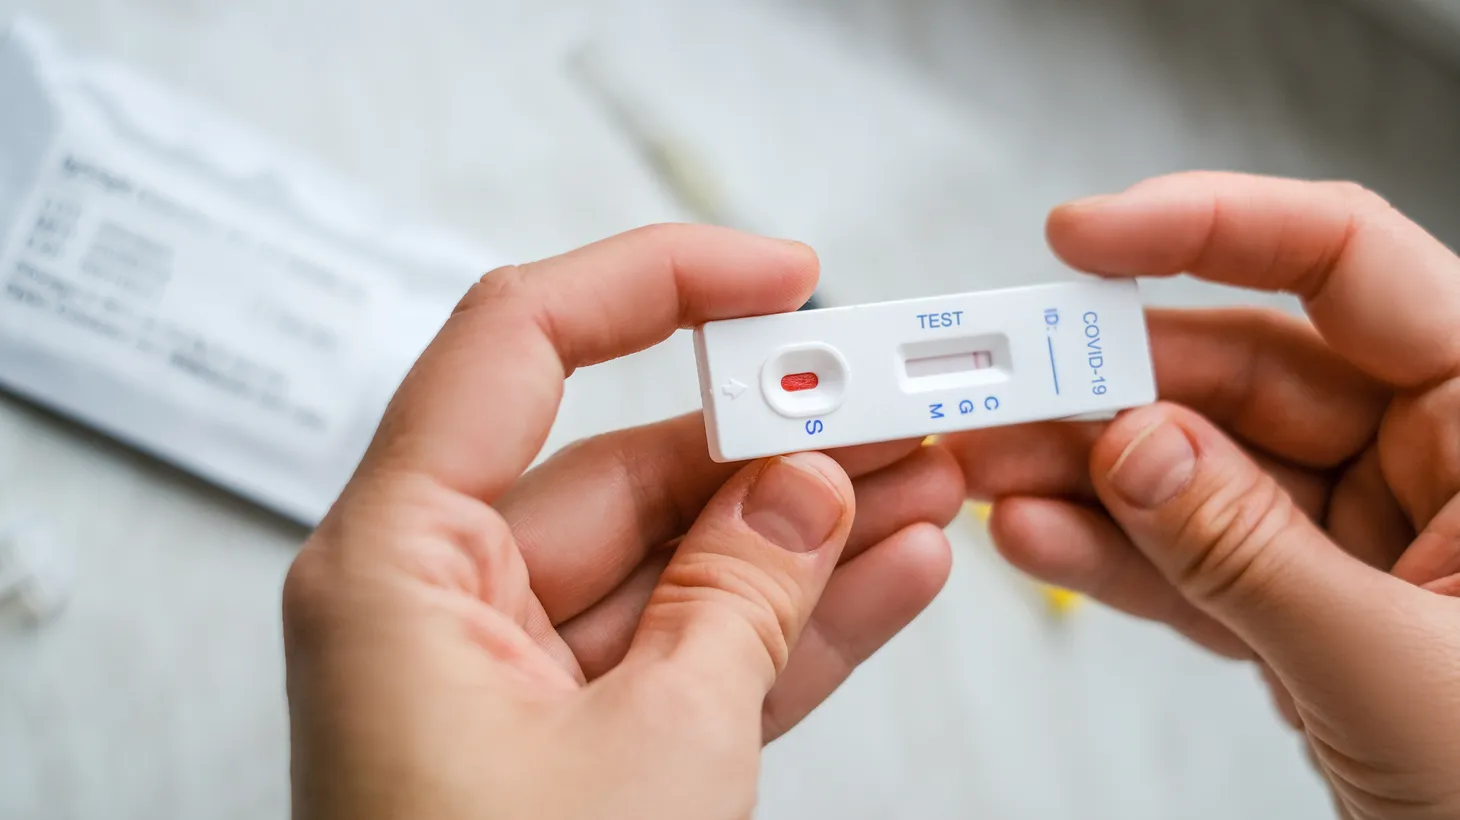 The Biden administration is sending four free at-home COVID-19 rapid tests per household.